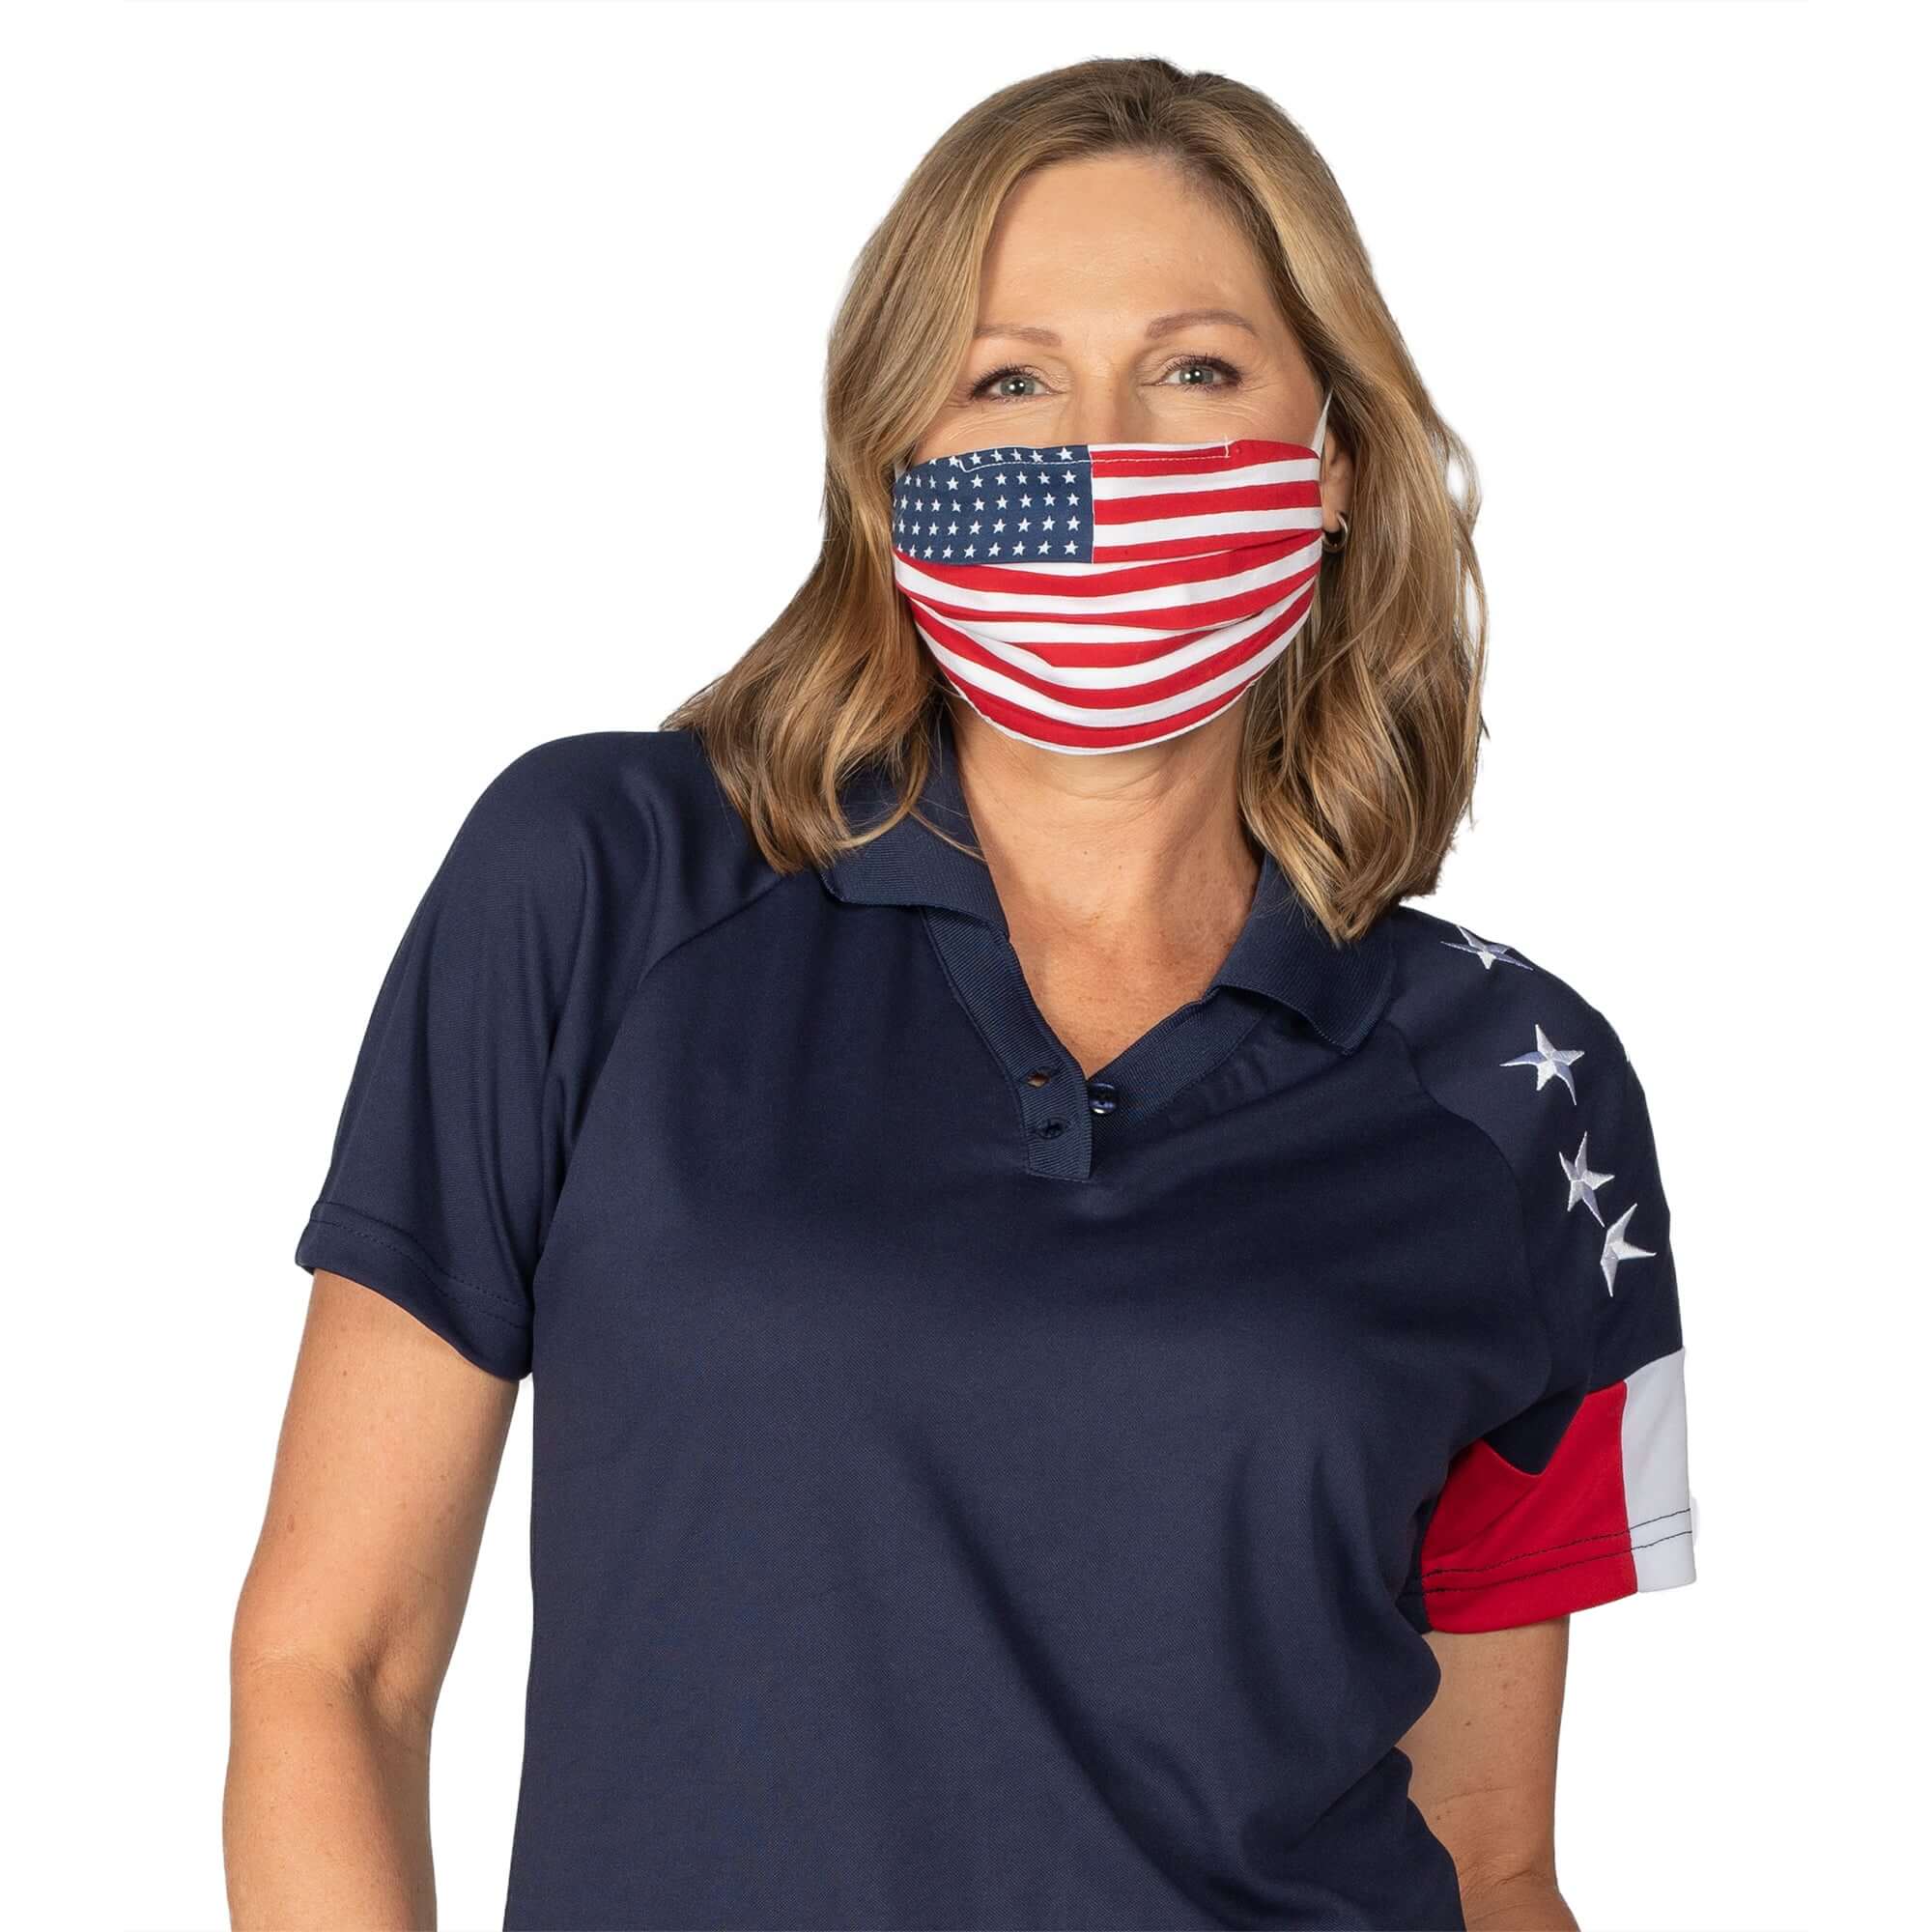 Patriotic Facemask 2-Pack Combo - the flag shirt